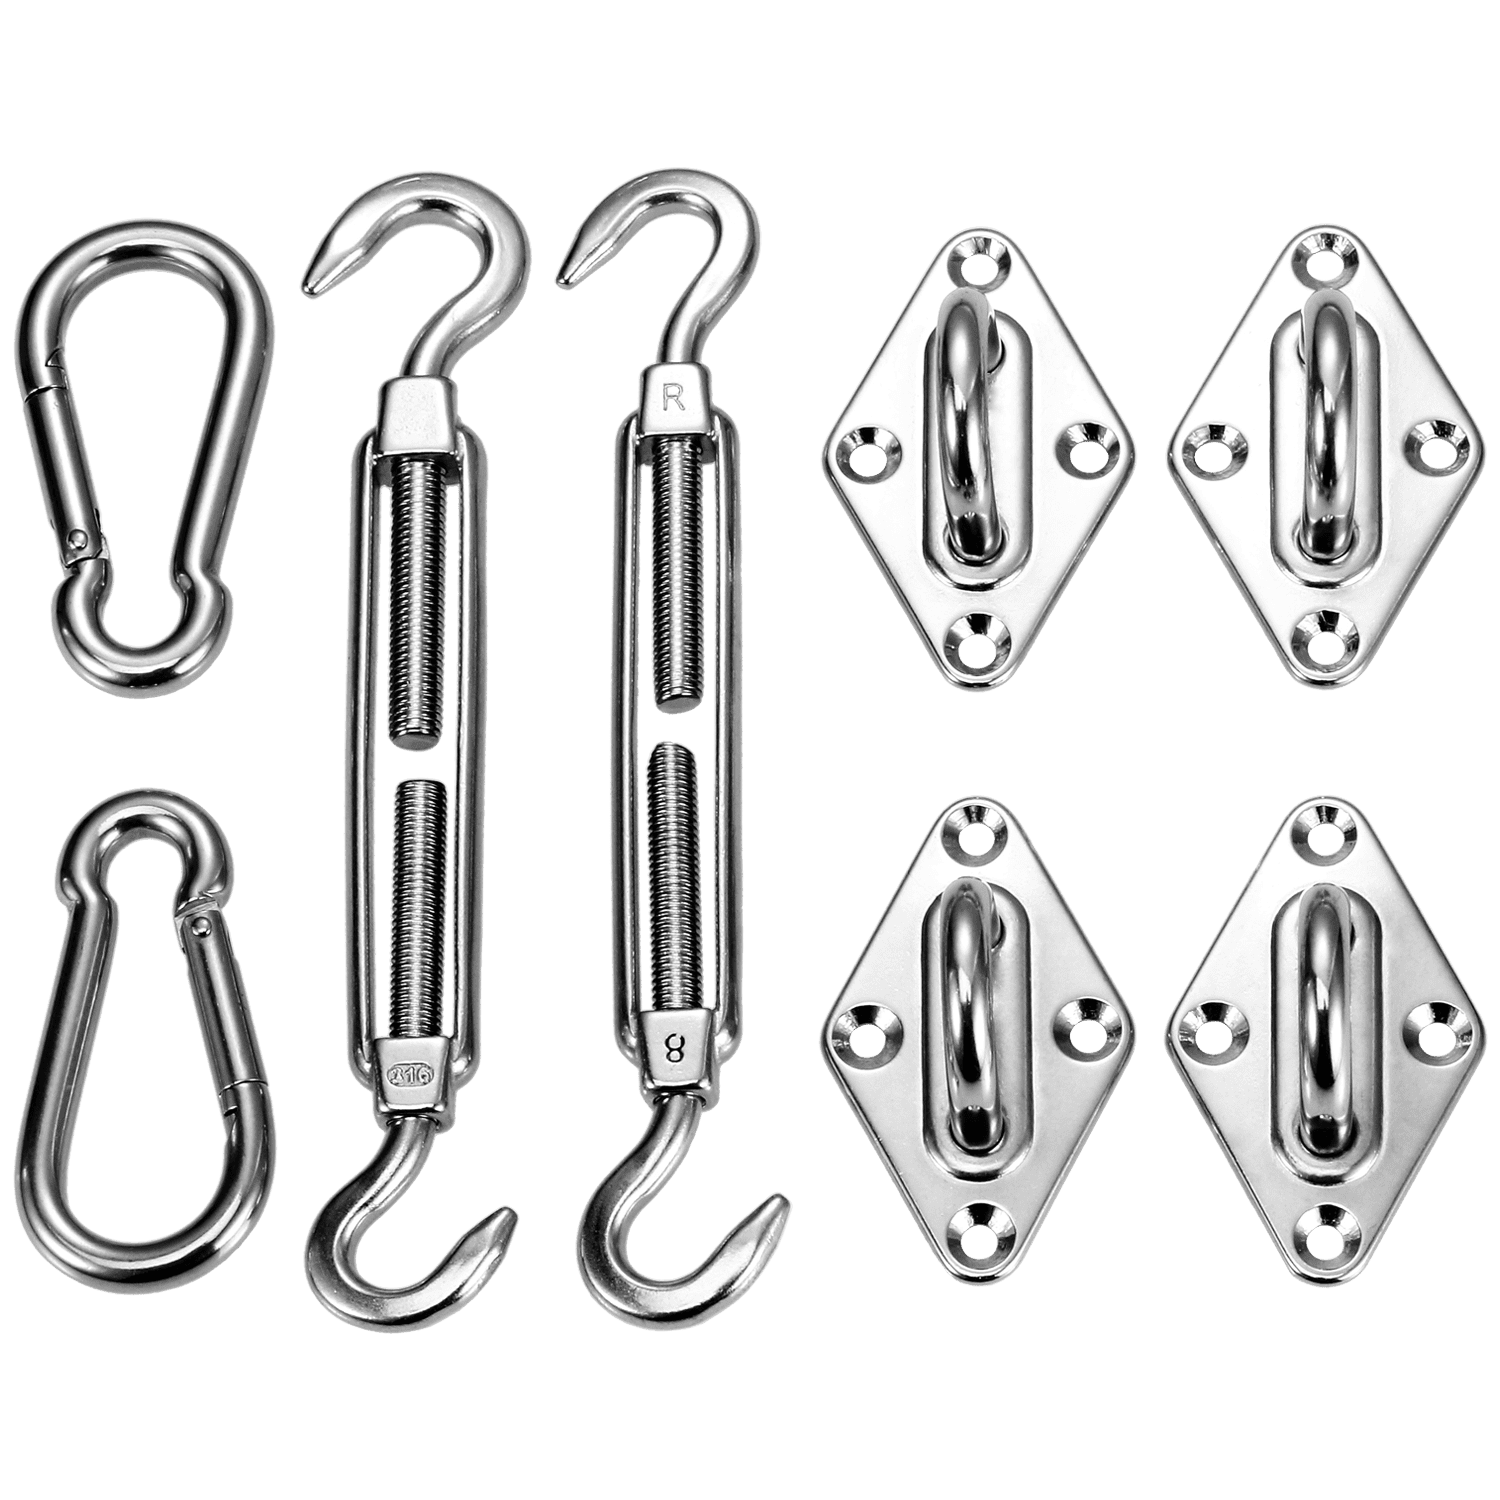 SODIAL Awning Attachment Set Heavy Duty Sun Shade Sail Installation Stainless Steel Hardware Kit For And Square Rectangle Sun Sail Fixing